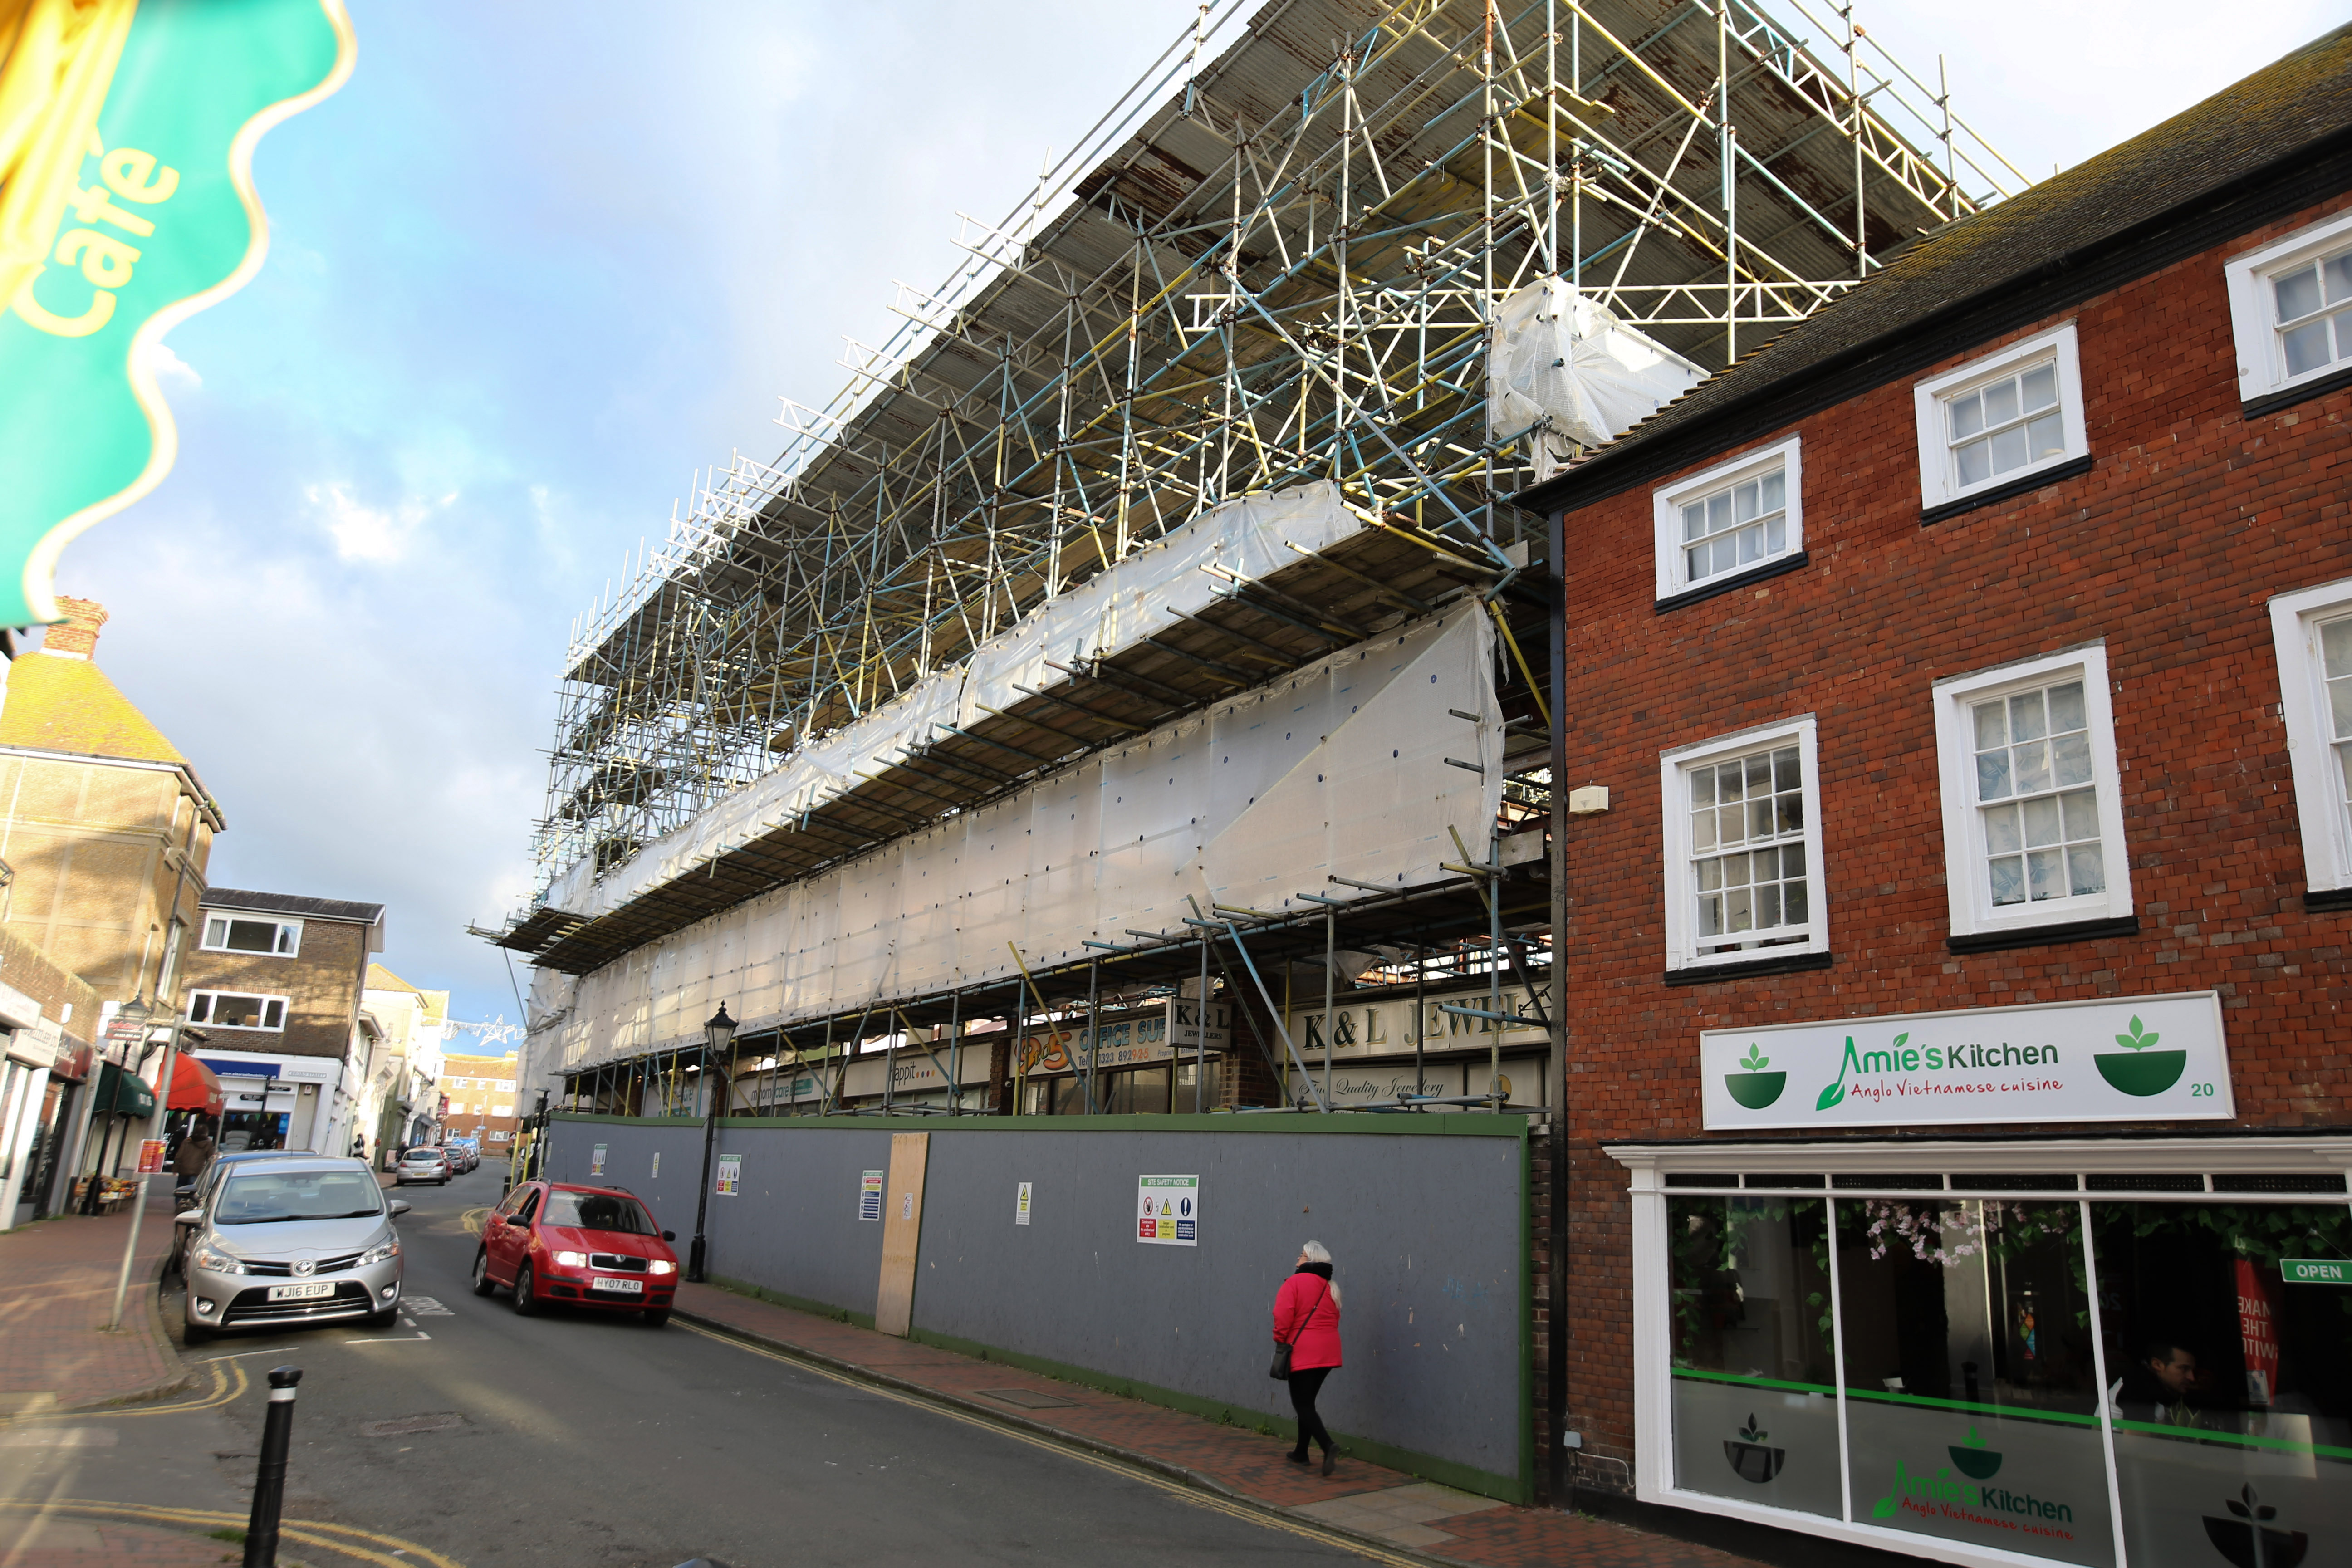 The metal structure towering over a high street must come down, a judge ruled